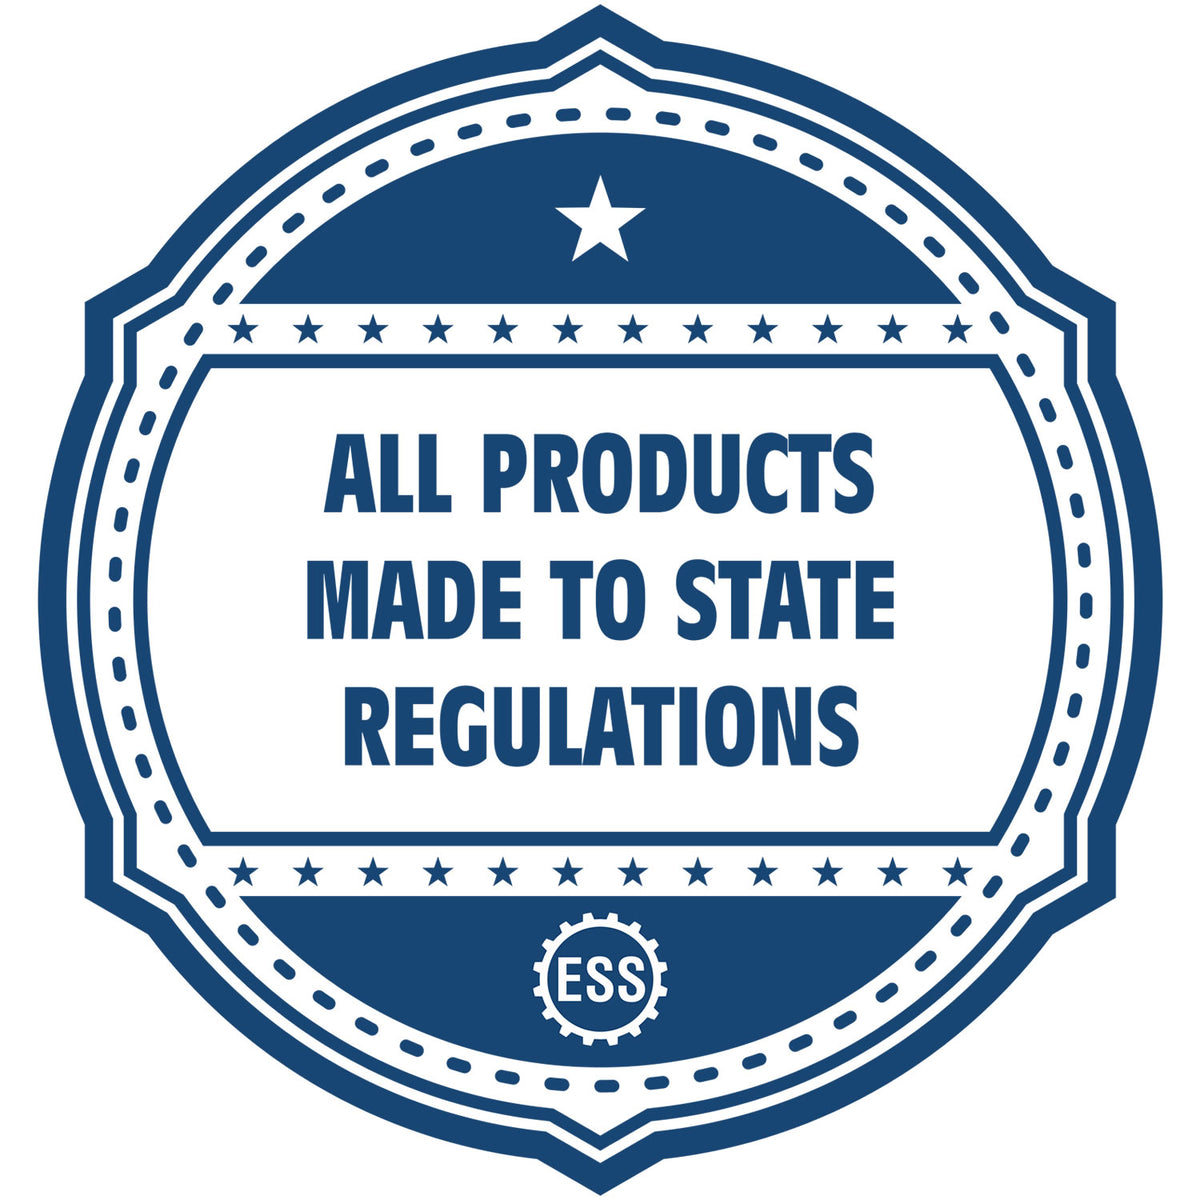 An icon or badge element for the Slim Pre-Inked Nebraska Professional Engineer Seal Stamp showing that this product is made in compliance with state regulations.